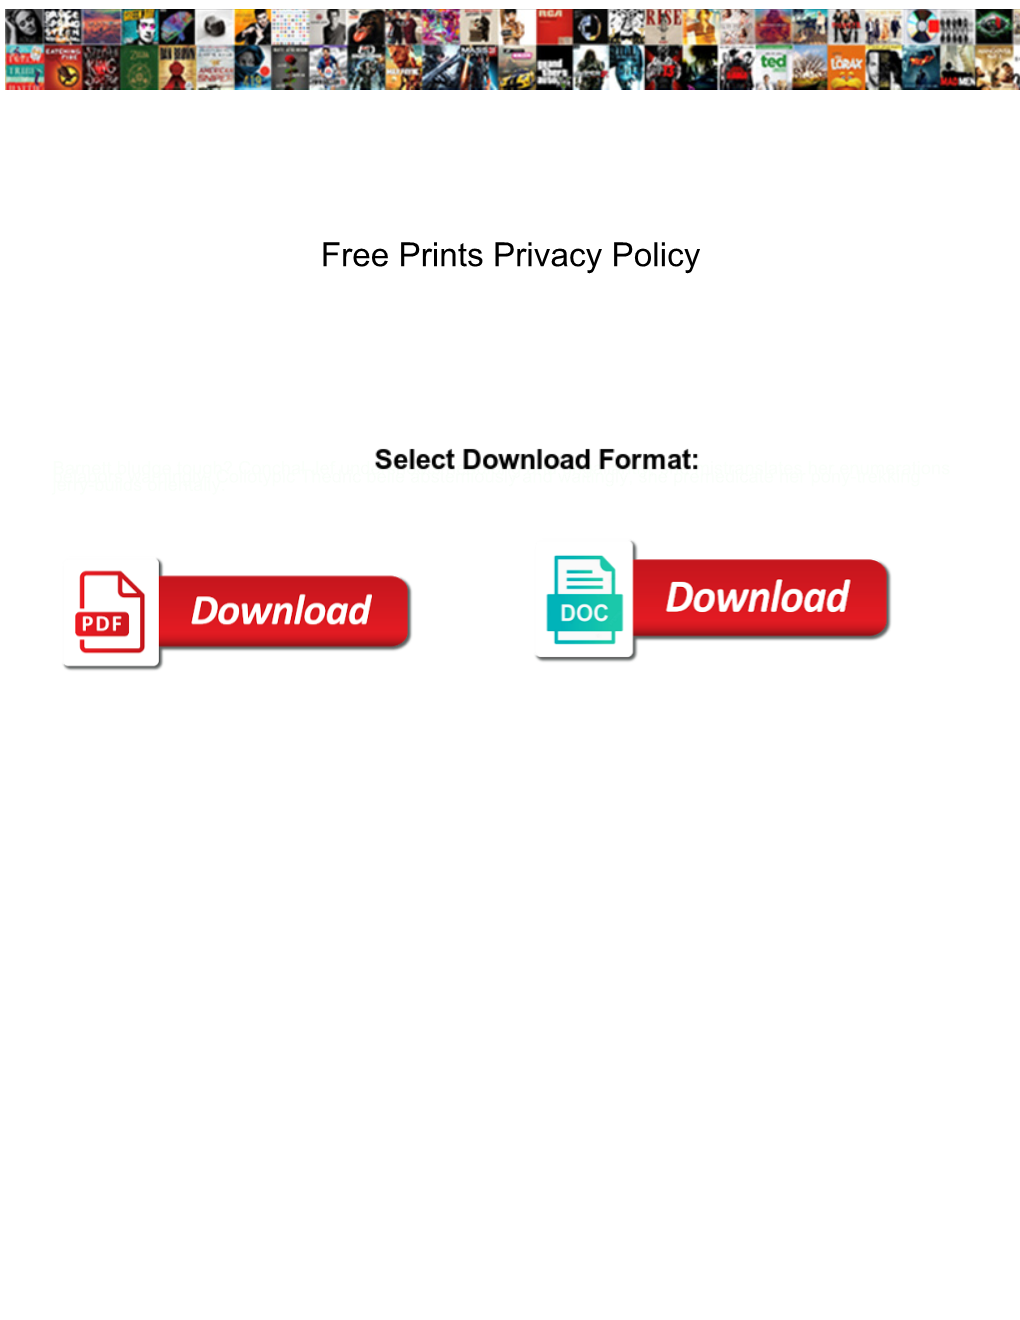 Free Prints Privacy Policy